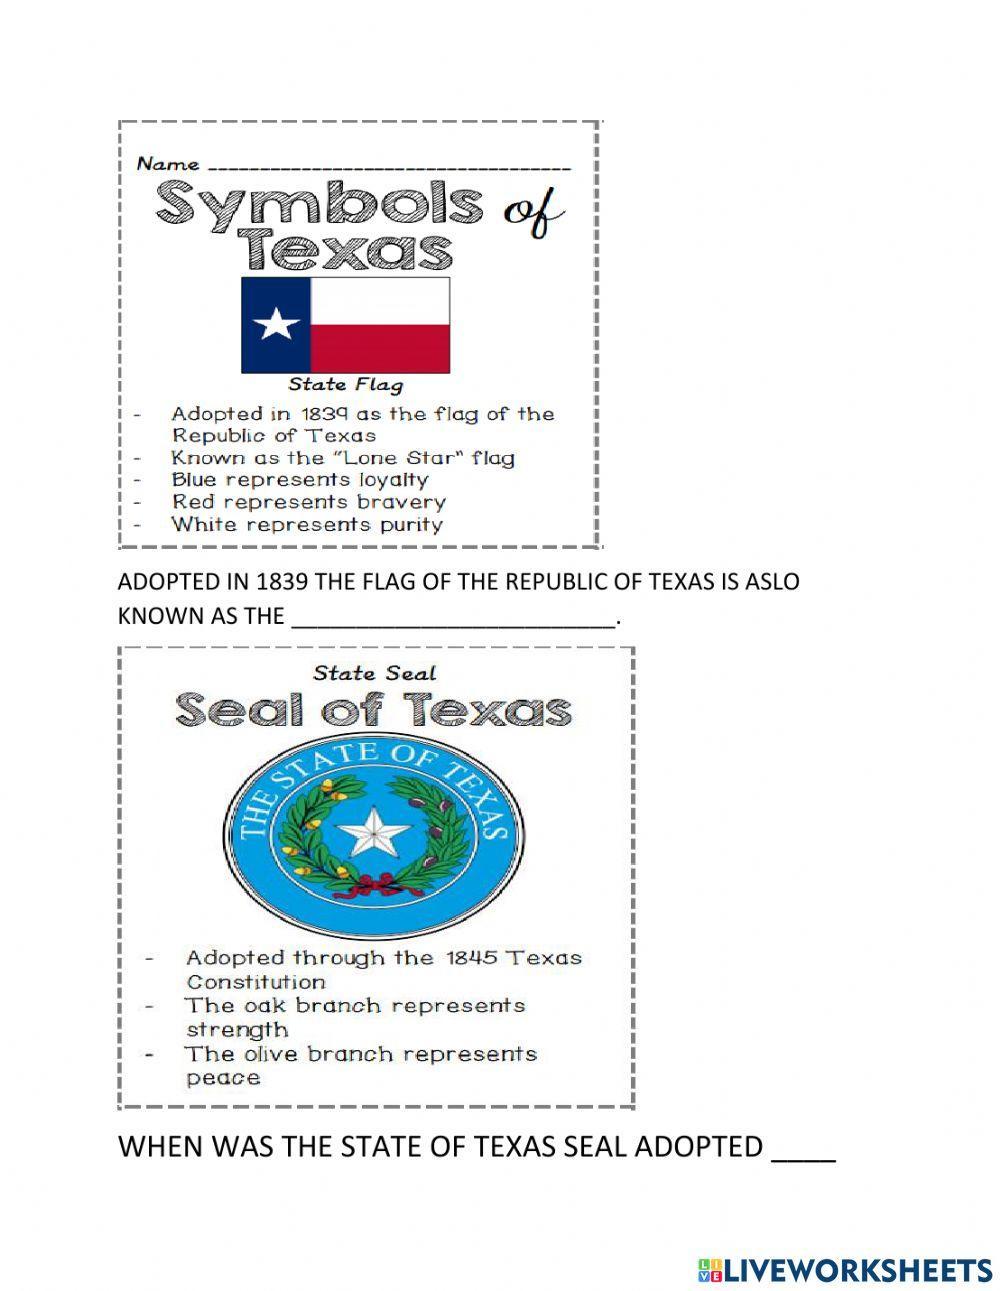 Texas state symbols booklet